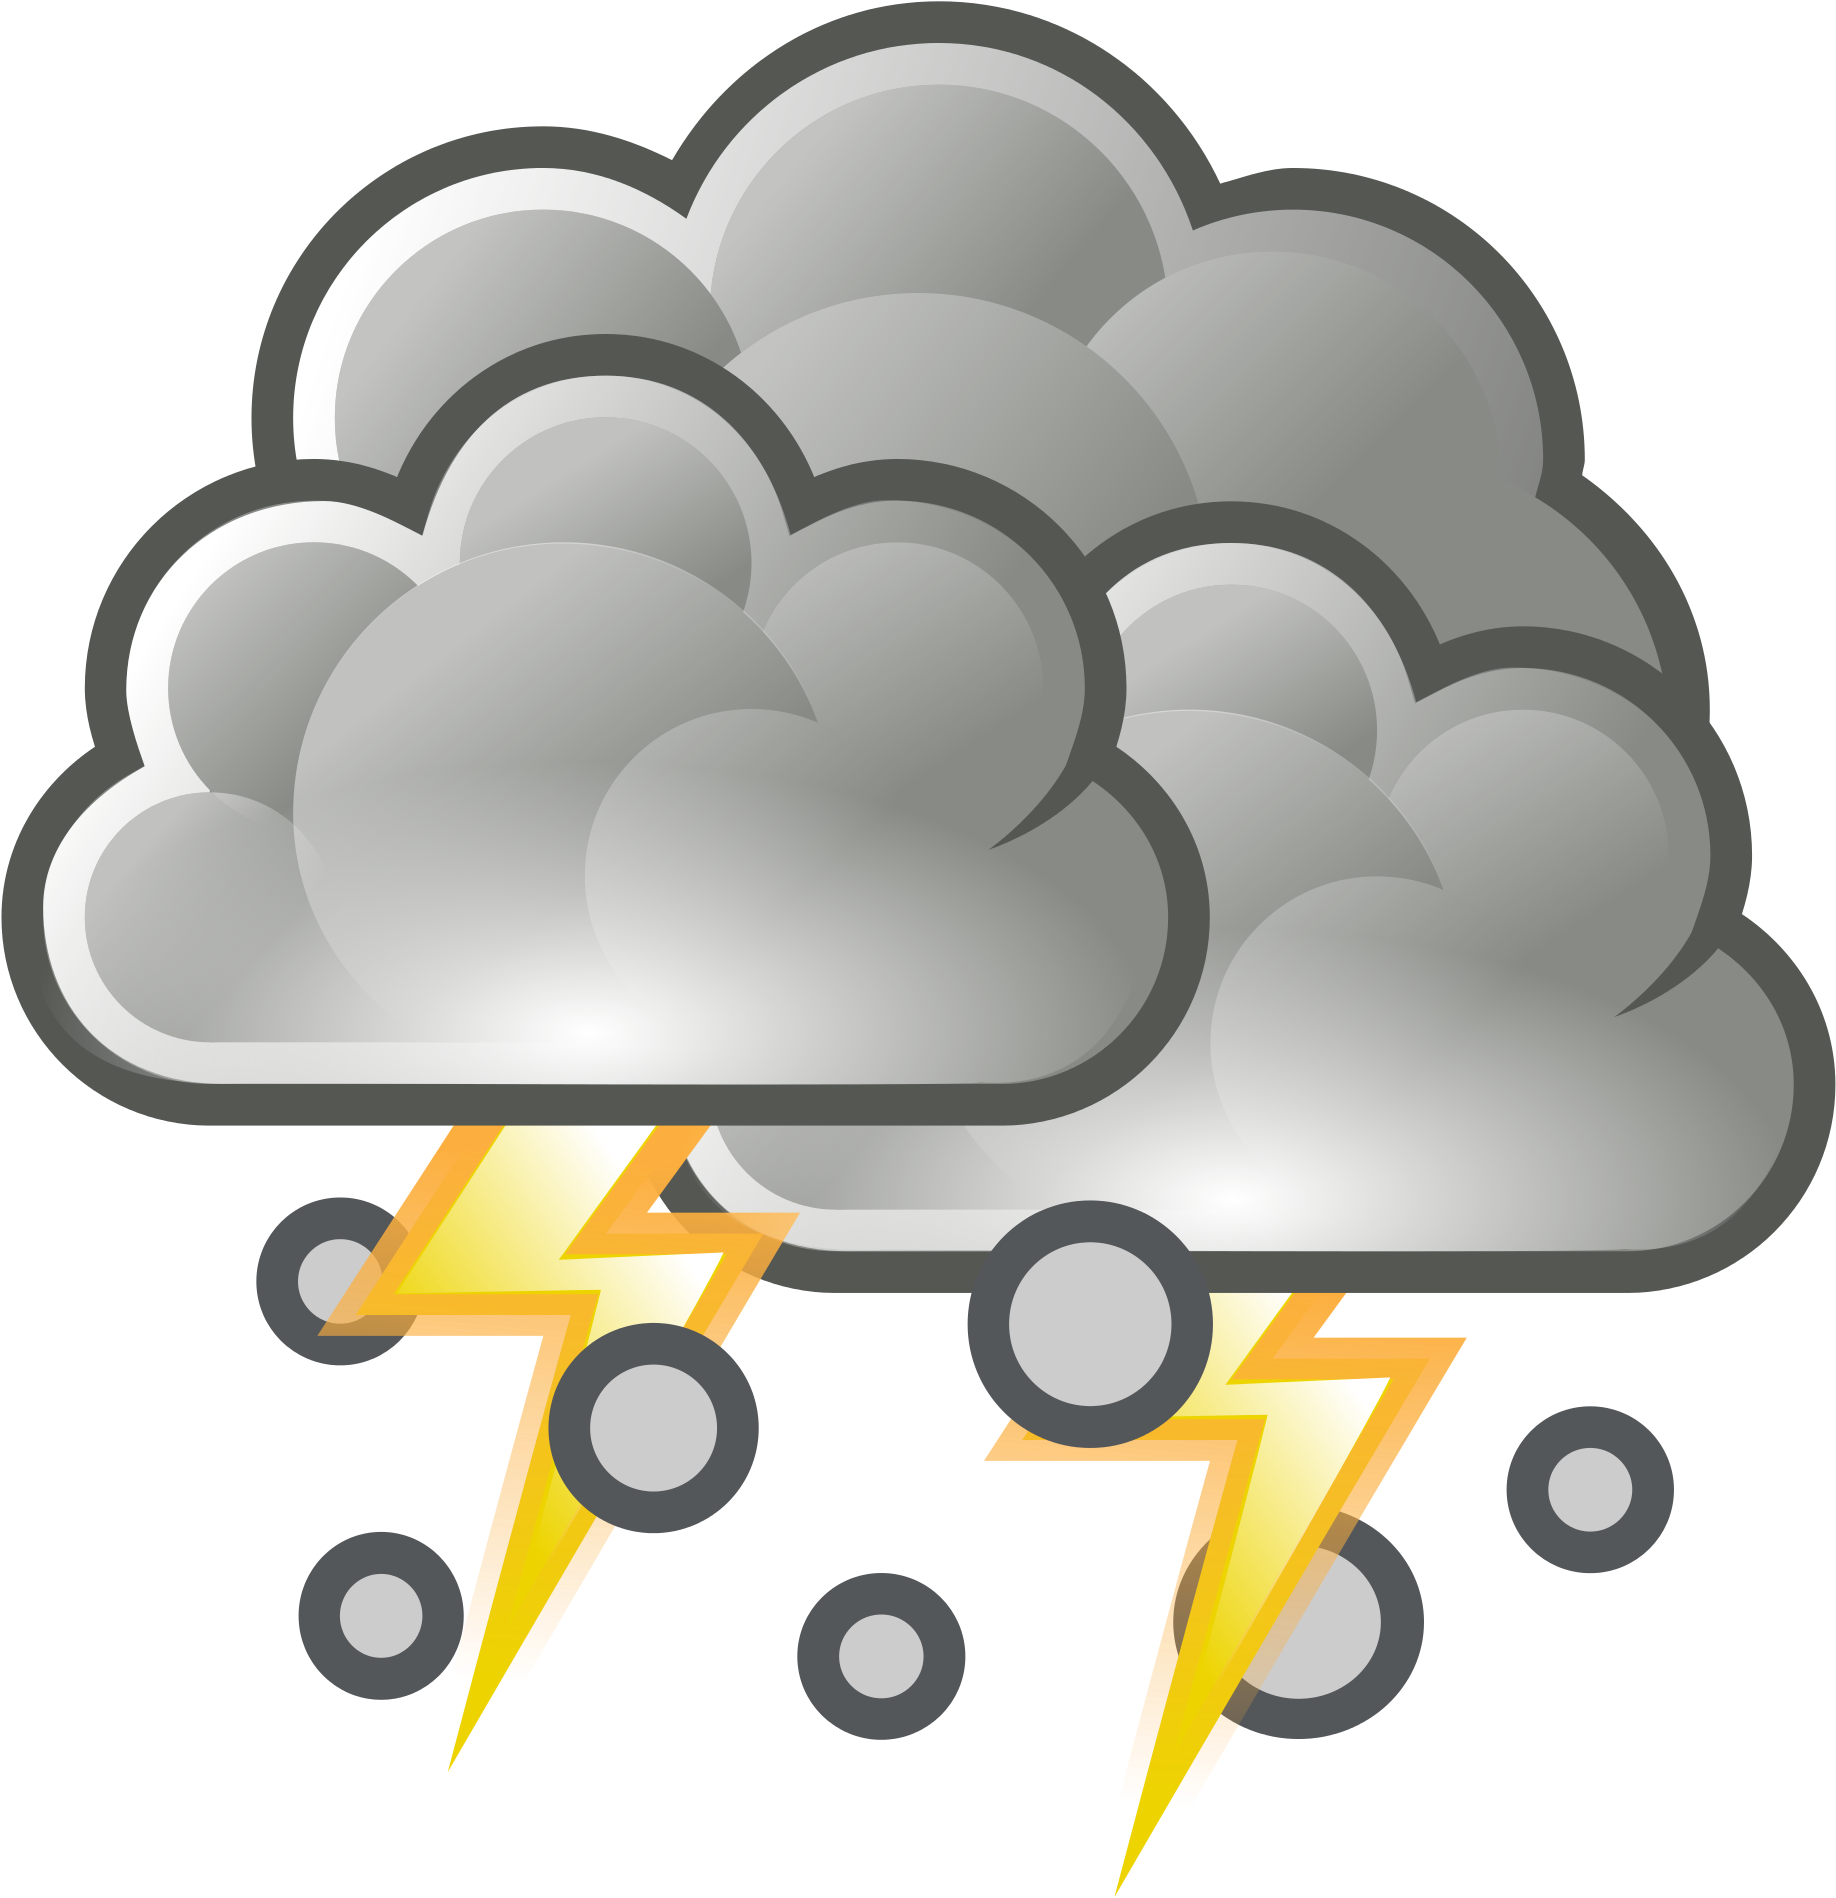 Storm Clipart Different Weather - Weather Symbols.